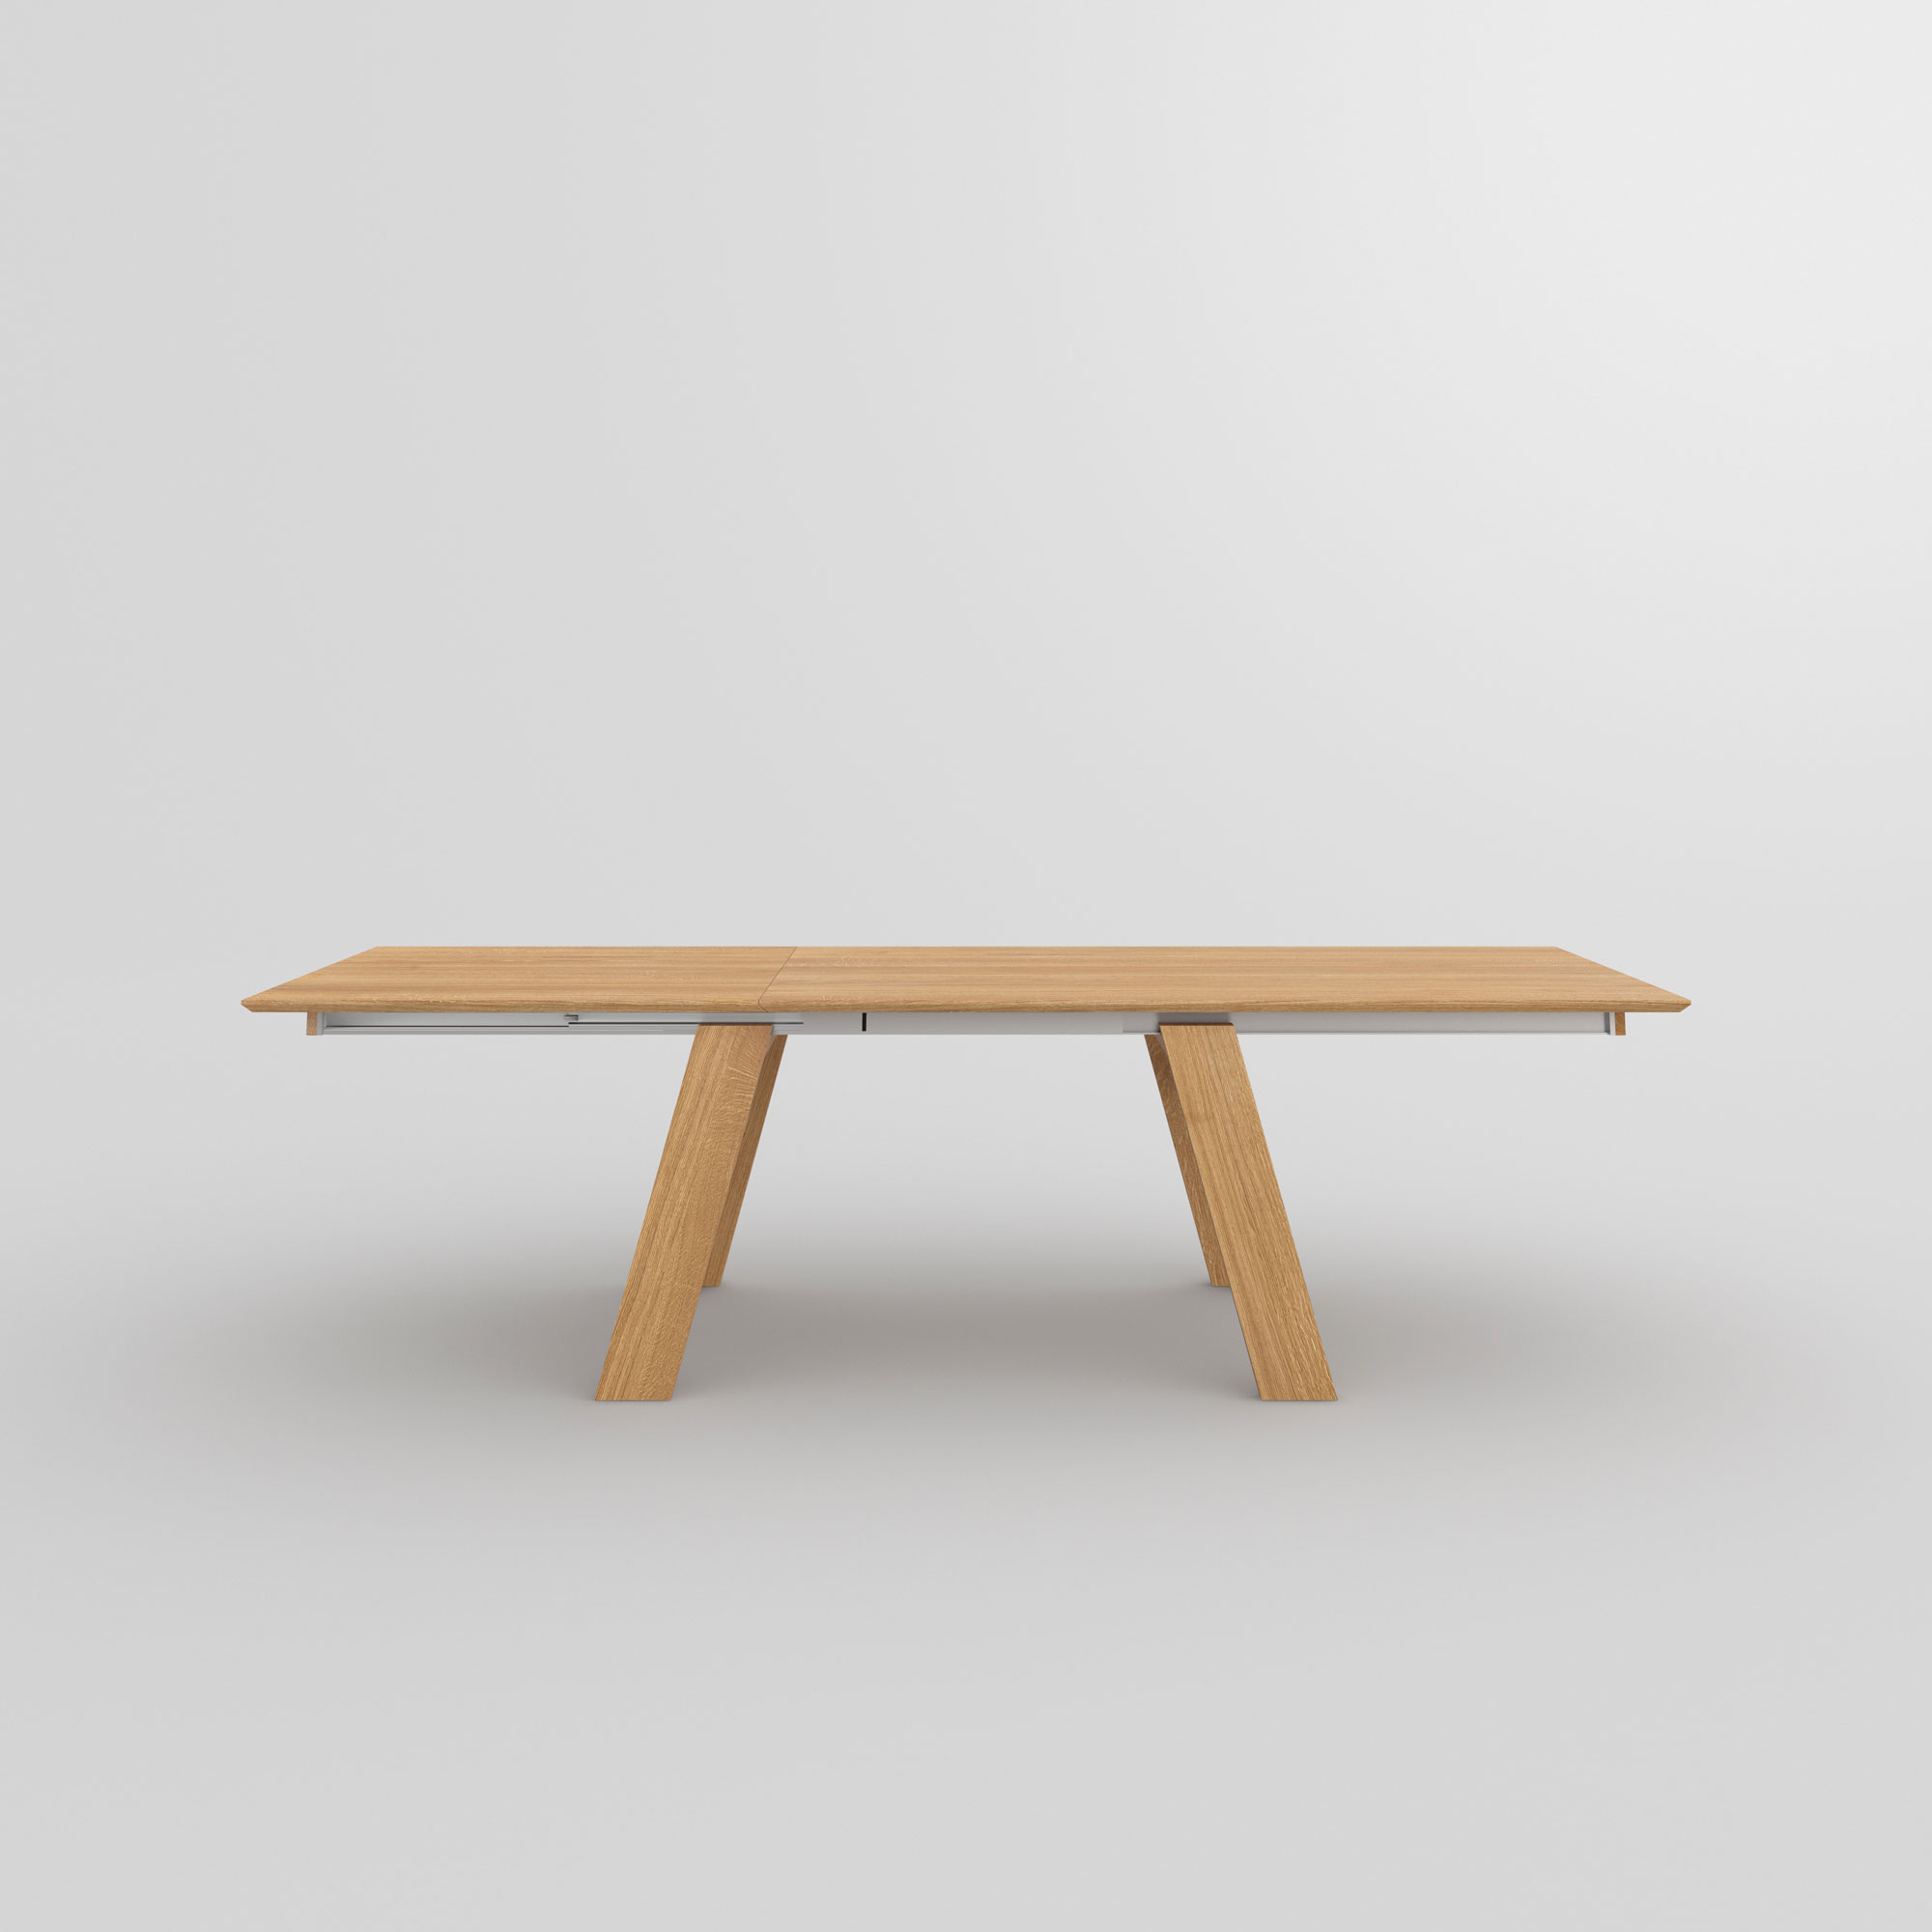 Solid Wood Extendable Table CULTUS BUTTERFLY cam2 custom made in solid wood by vitamin design